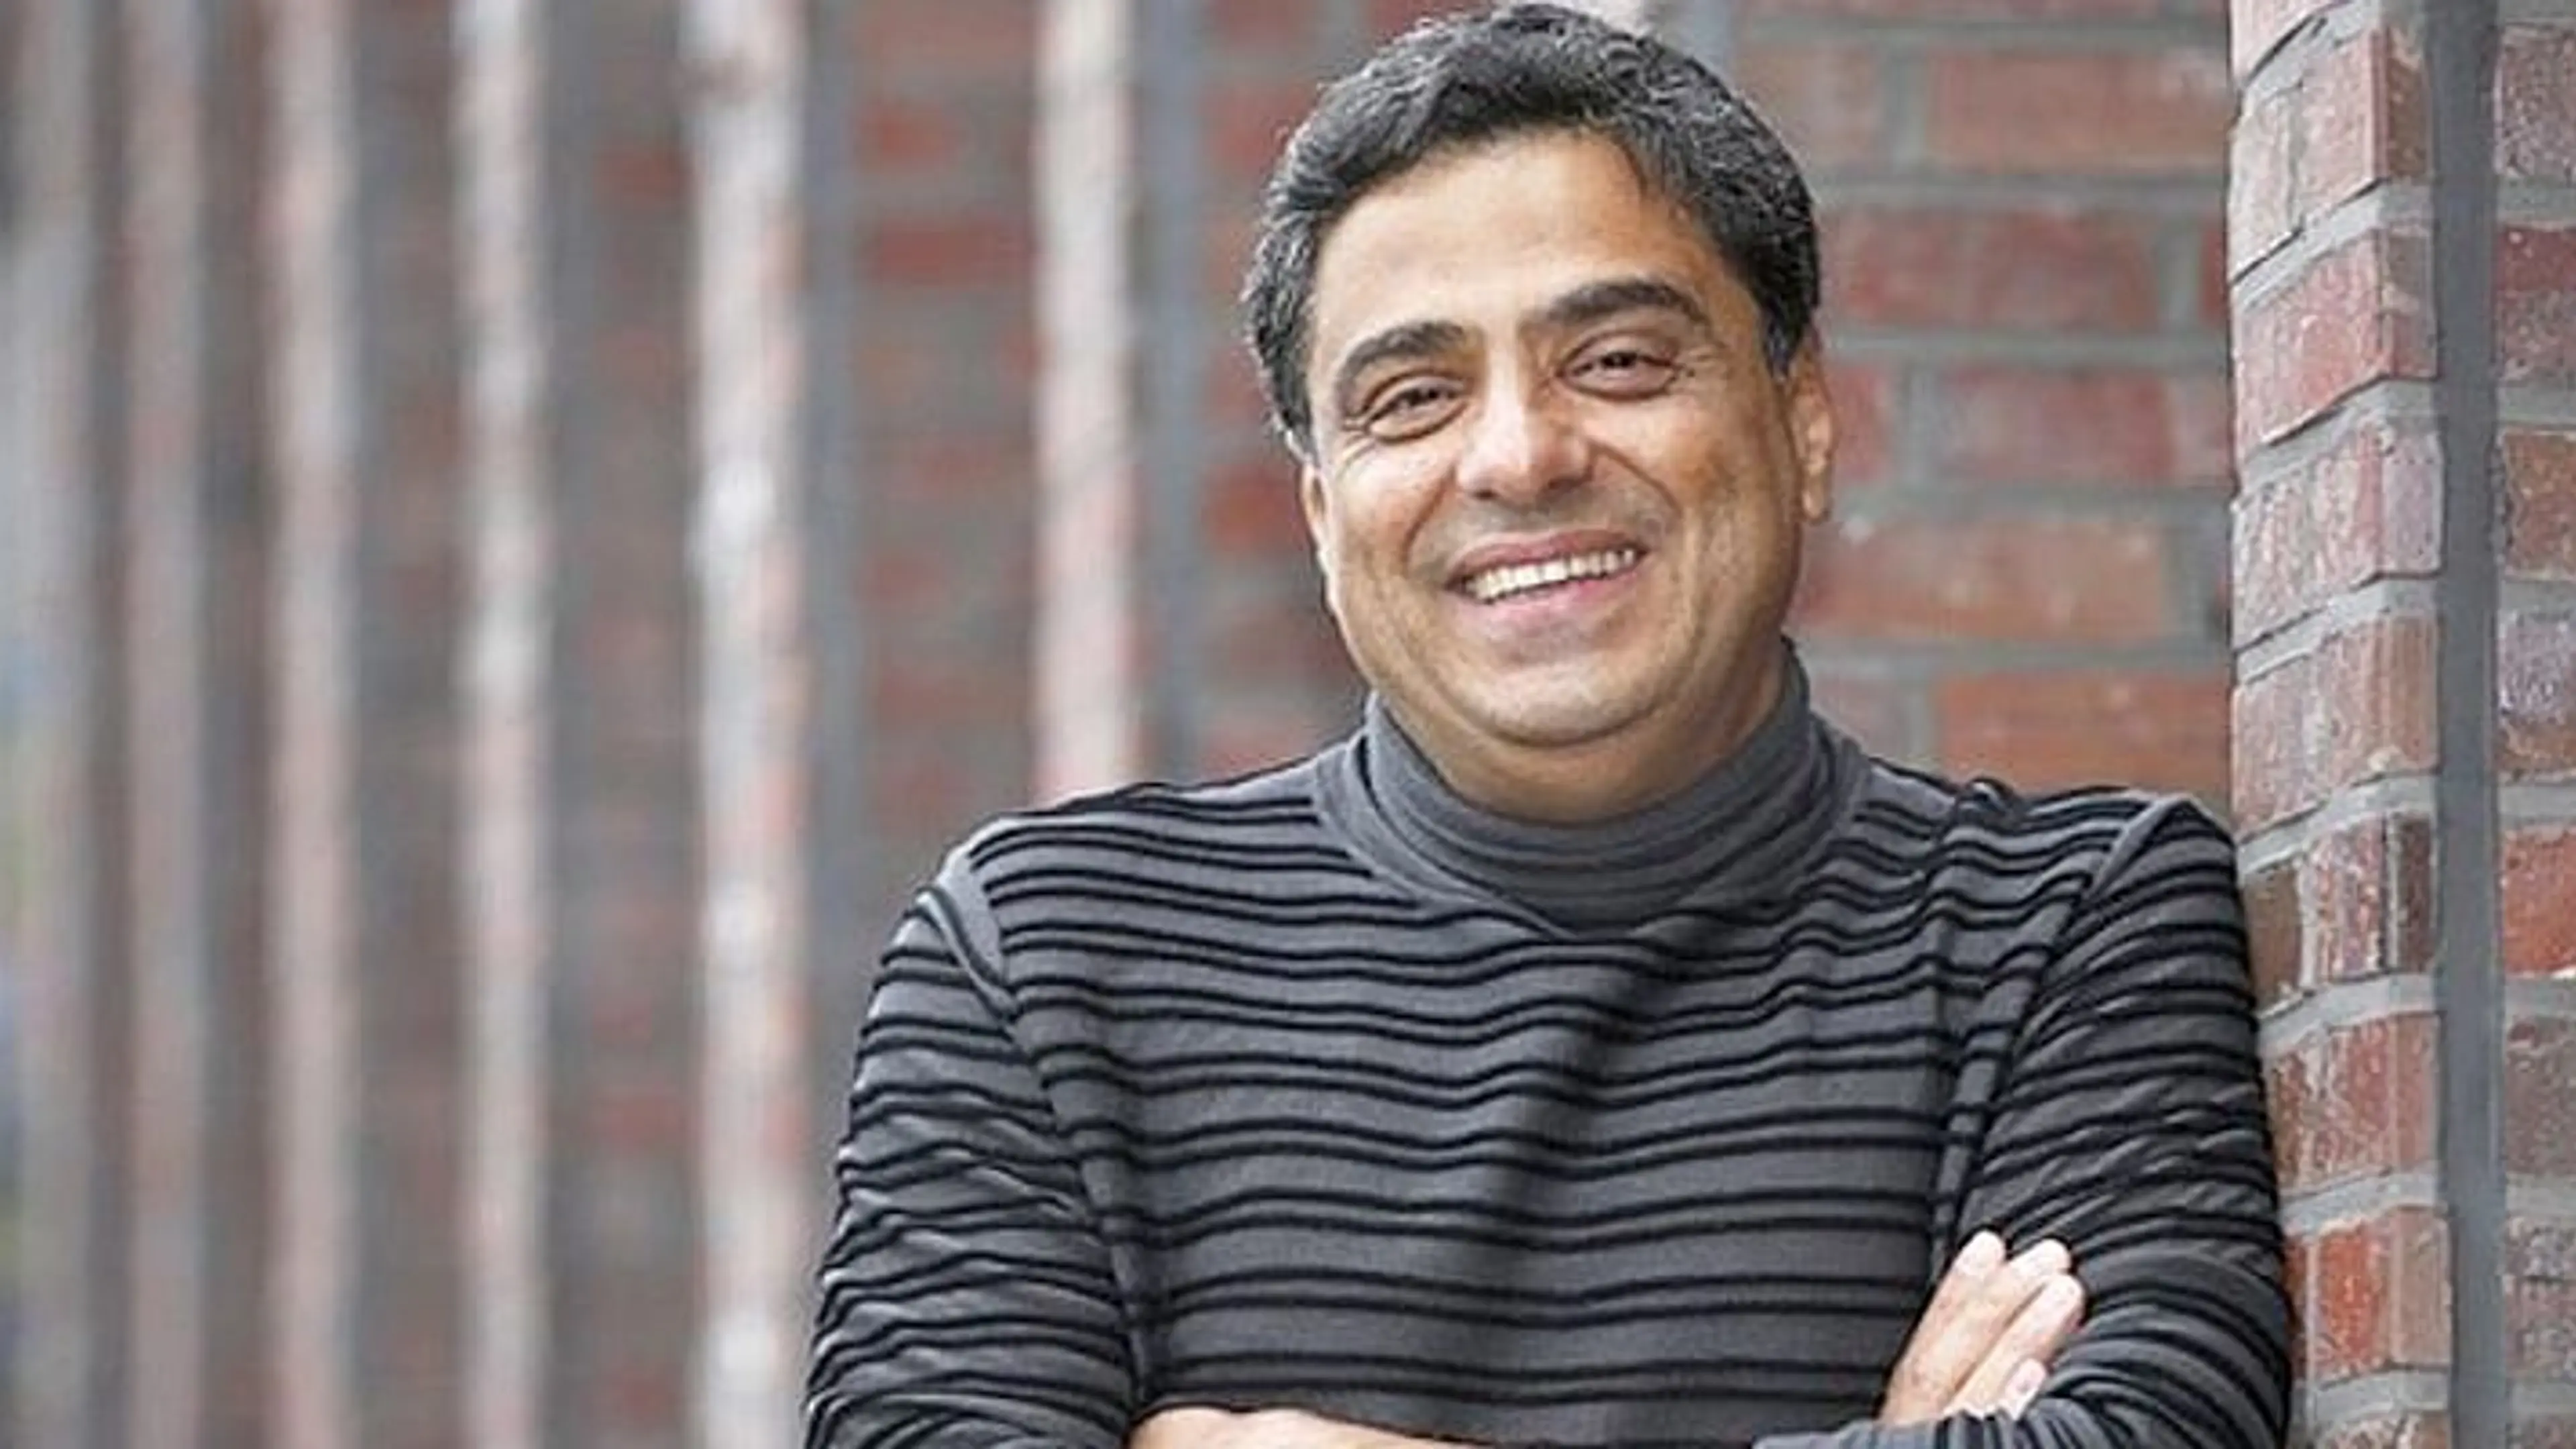 In media and entertainment, there’s no model for global platforms to acquire in local countries, says Ronnie Screwvala